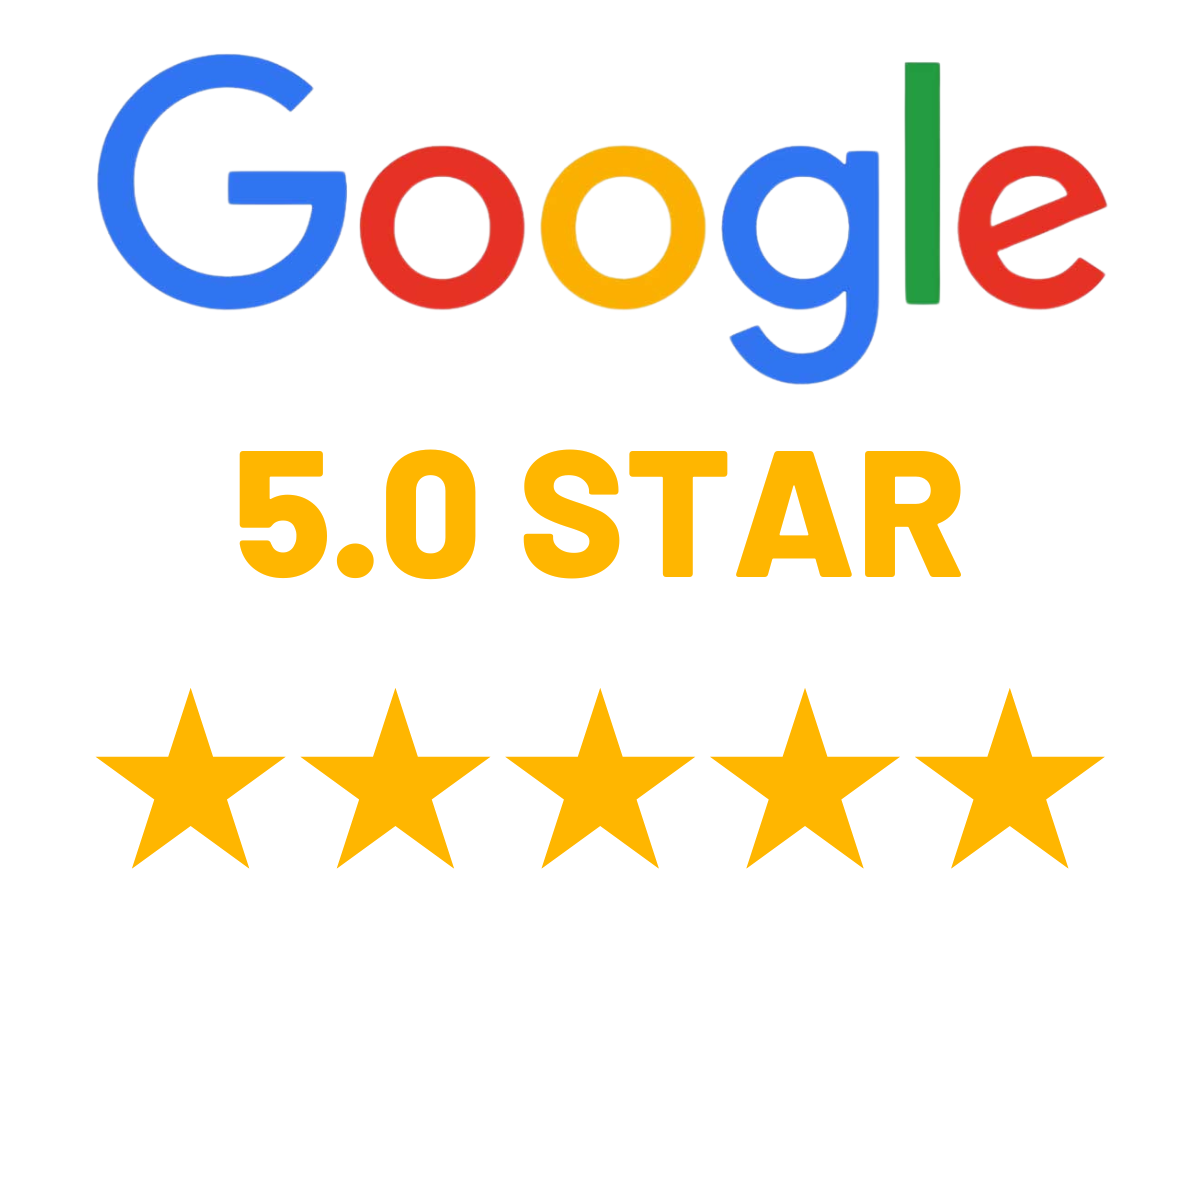 CK Law Firm Google Review